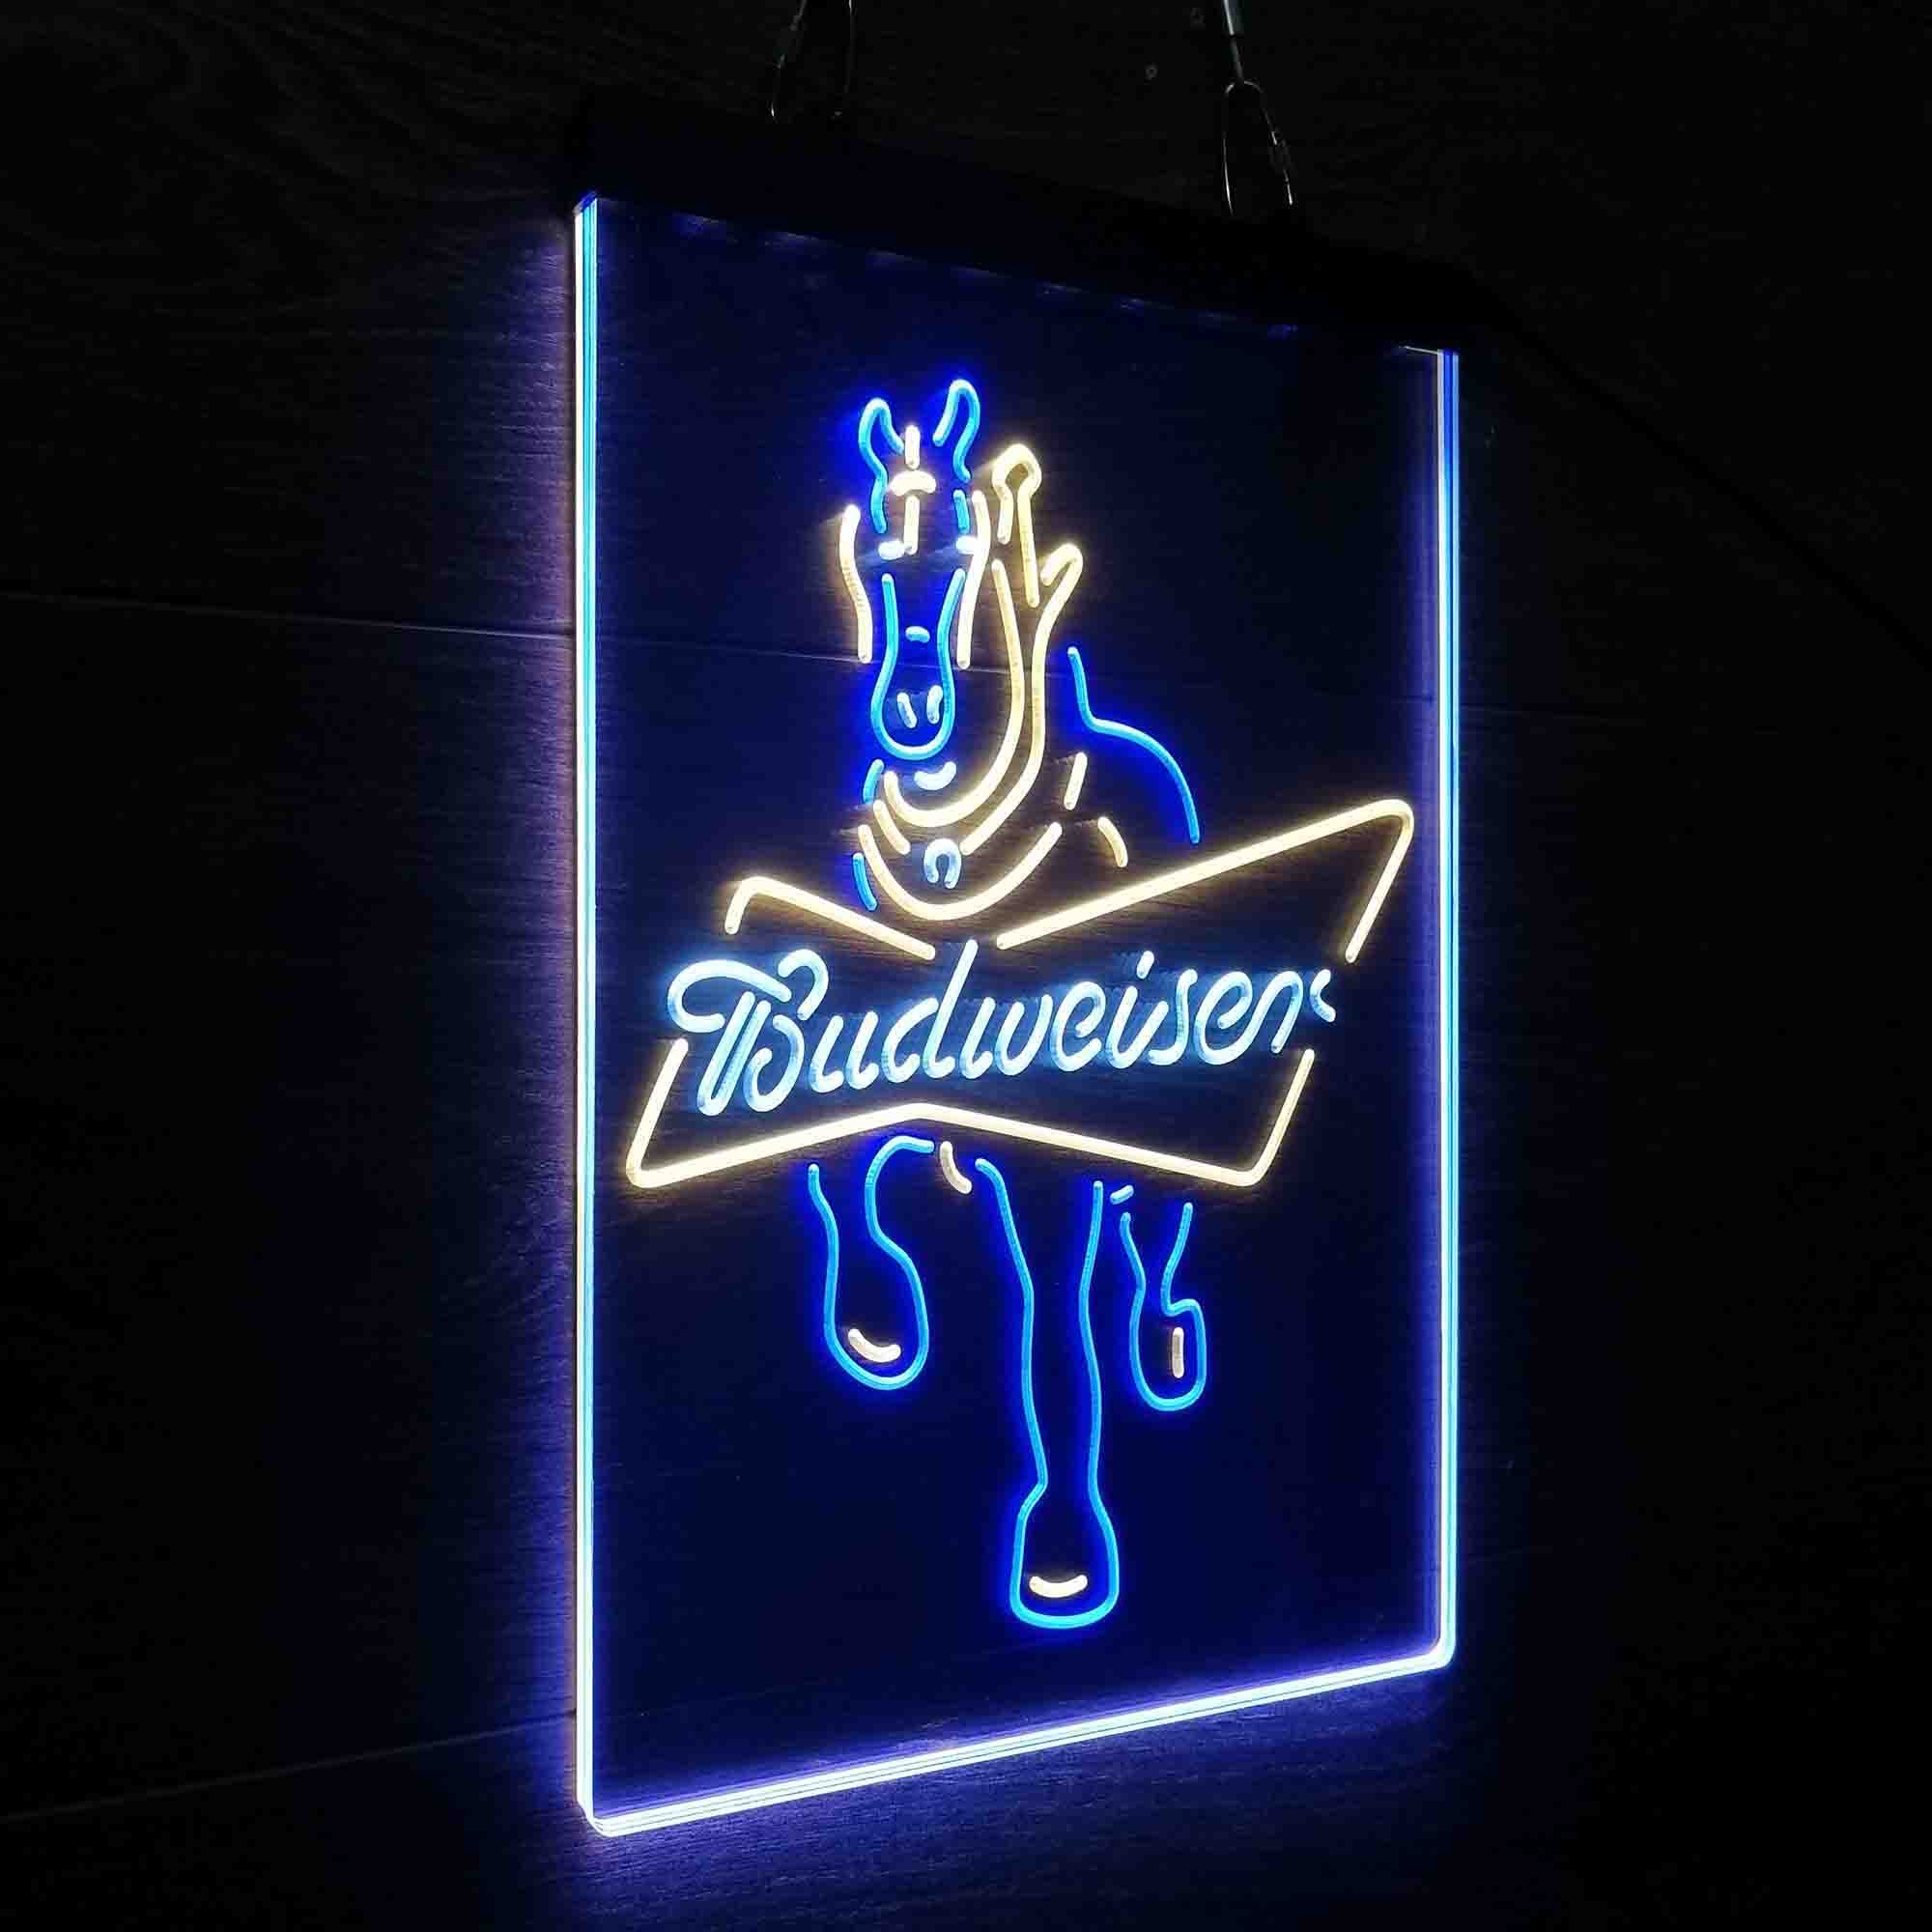 Budweiser Clydesdale Horse Neon 3-Color LED Sign